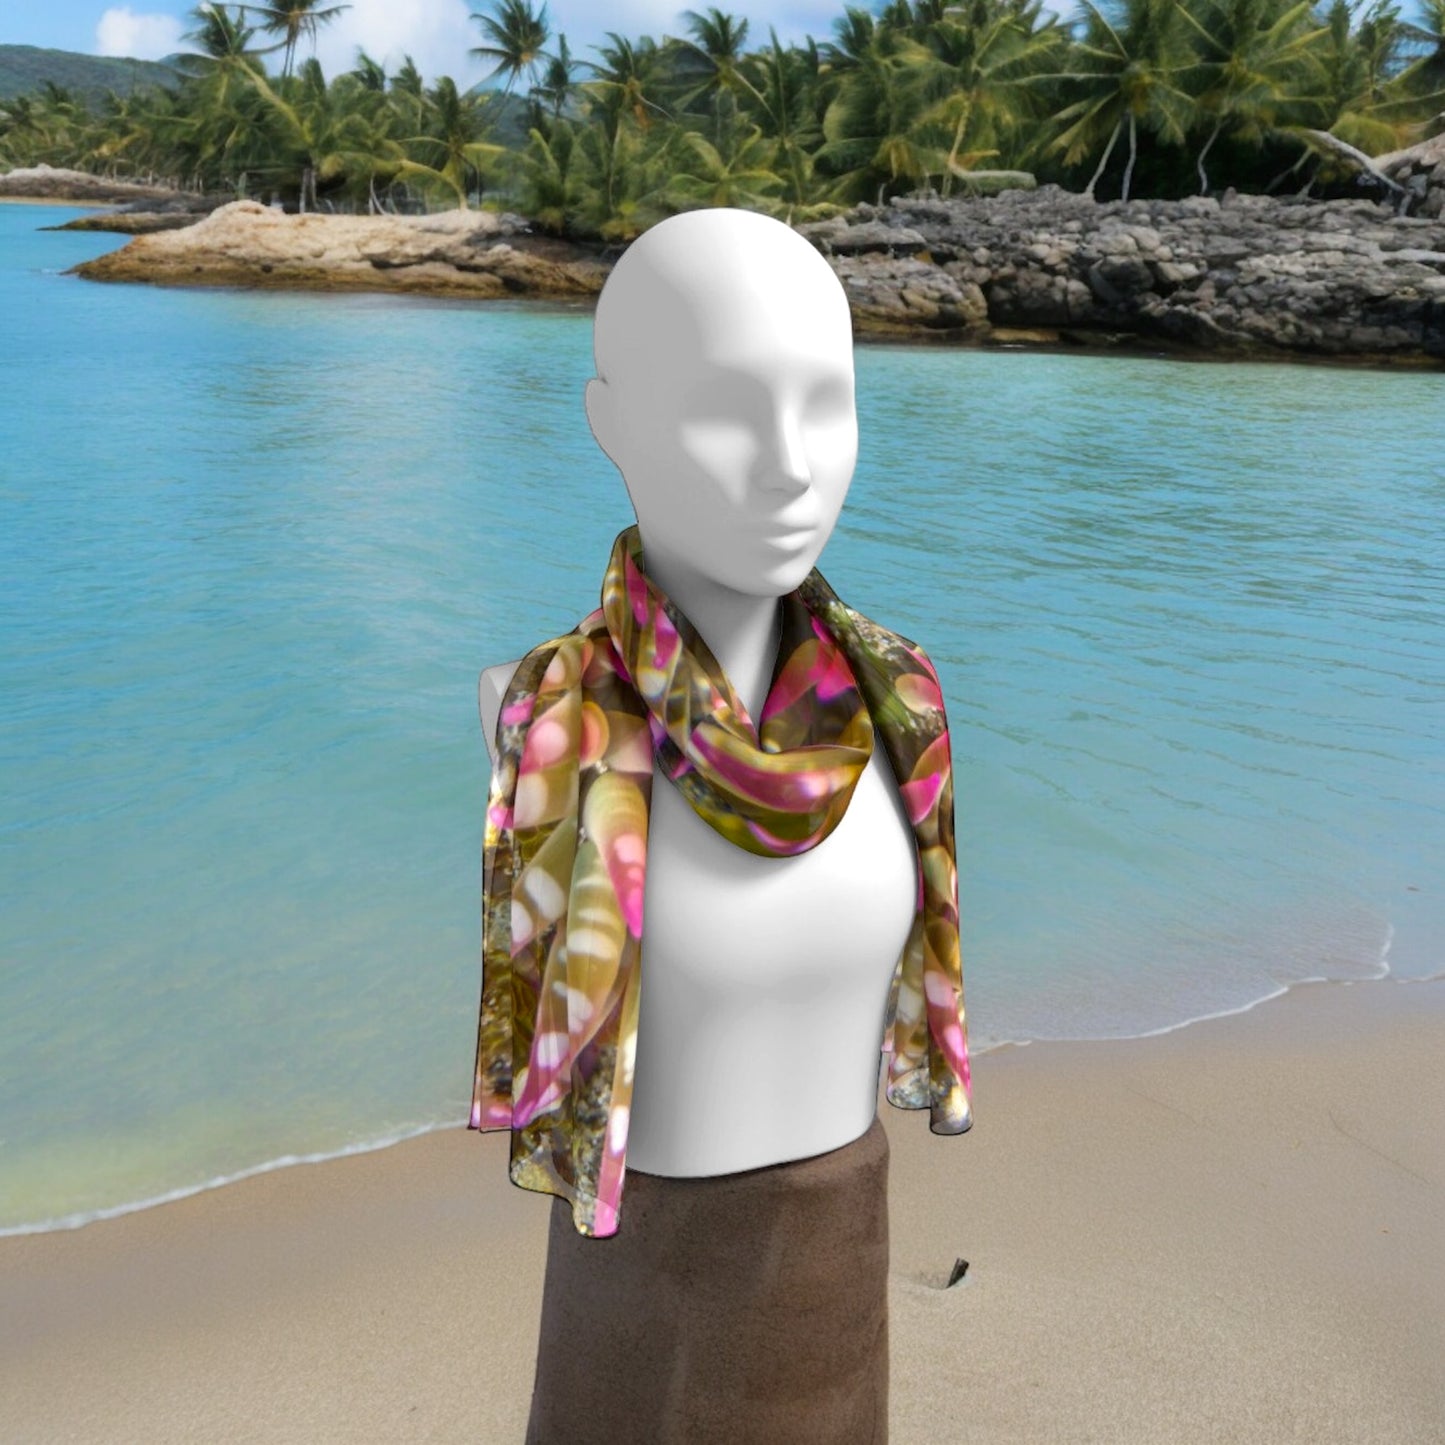 Pink Sea Anemone printed on a long scarf worn around the neck on a person at the beach.